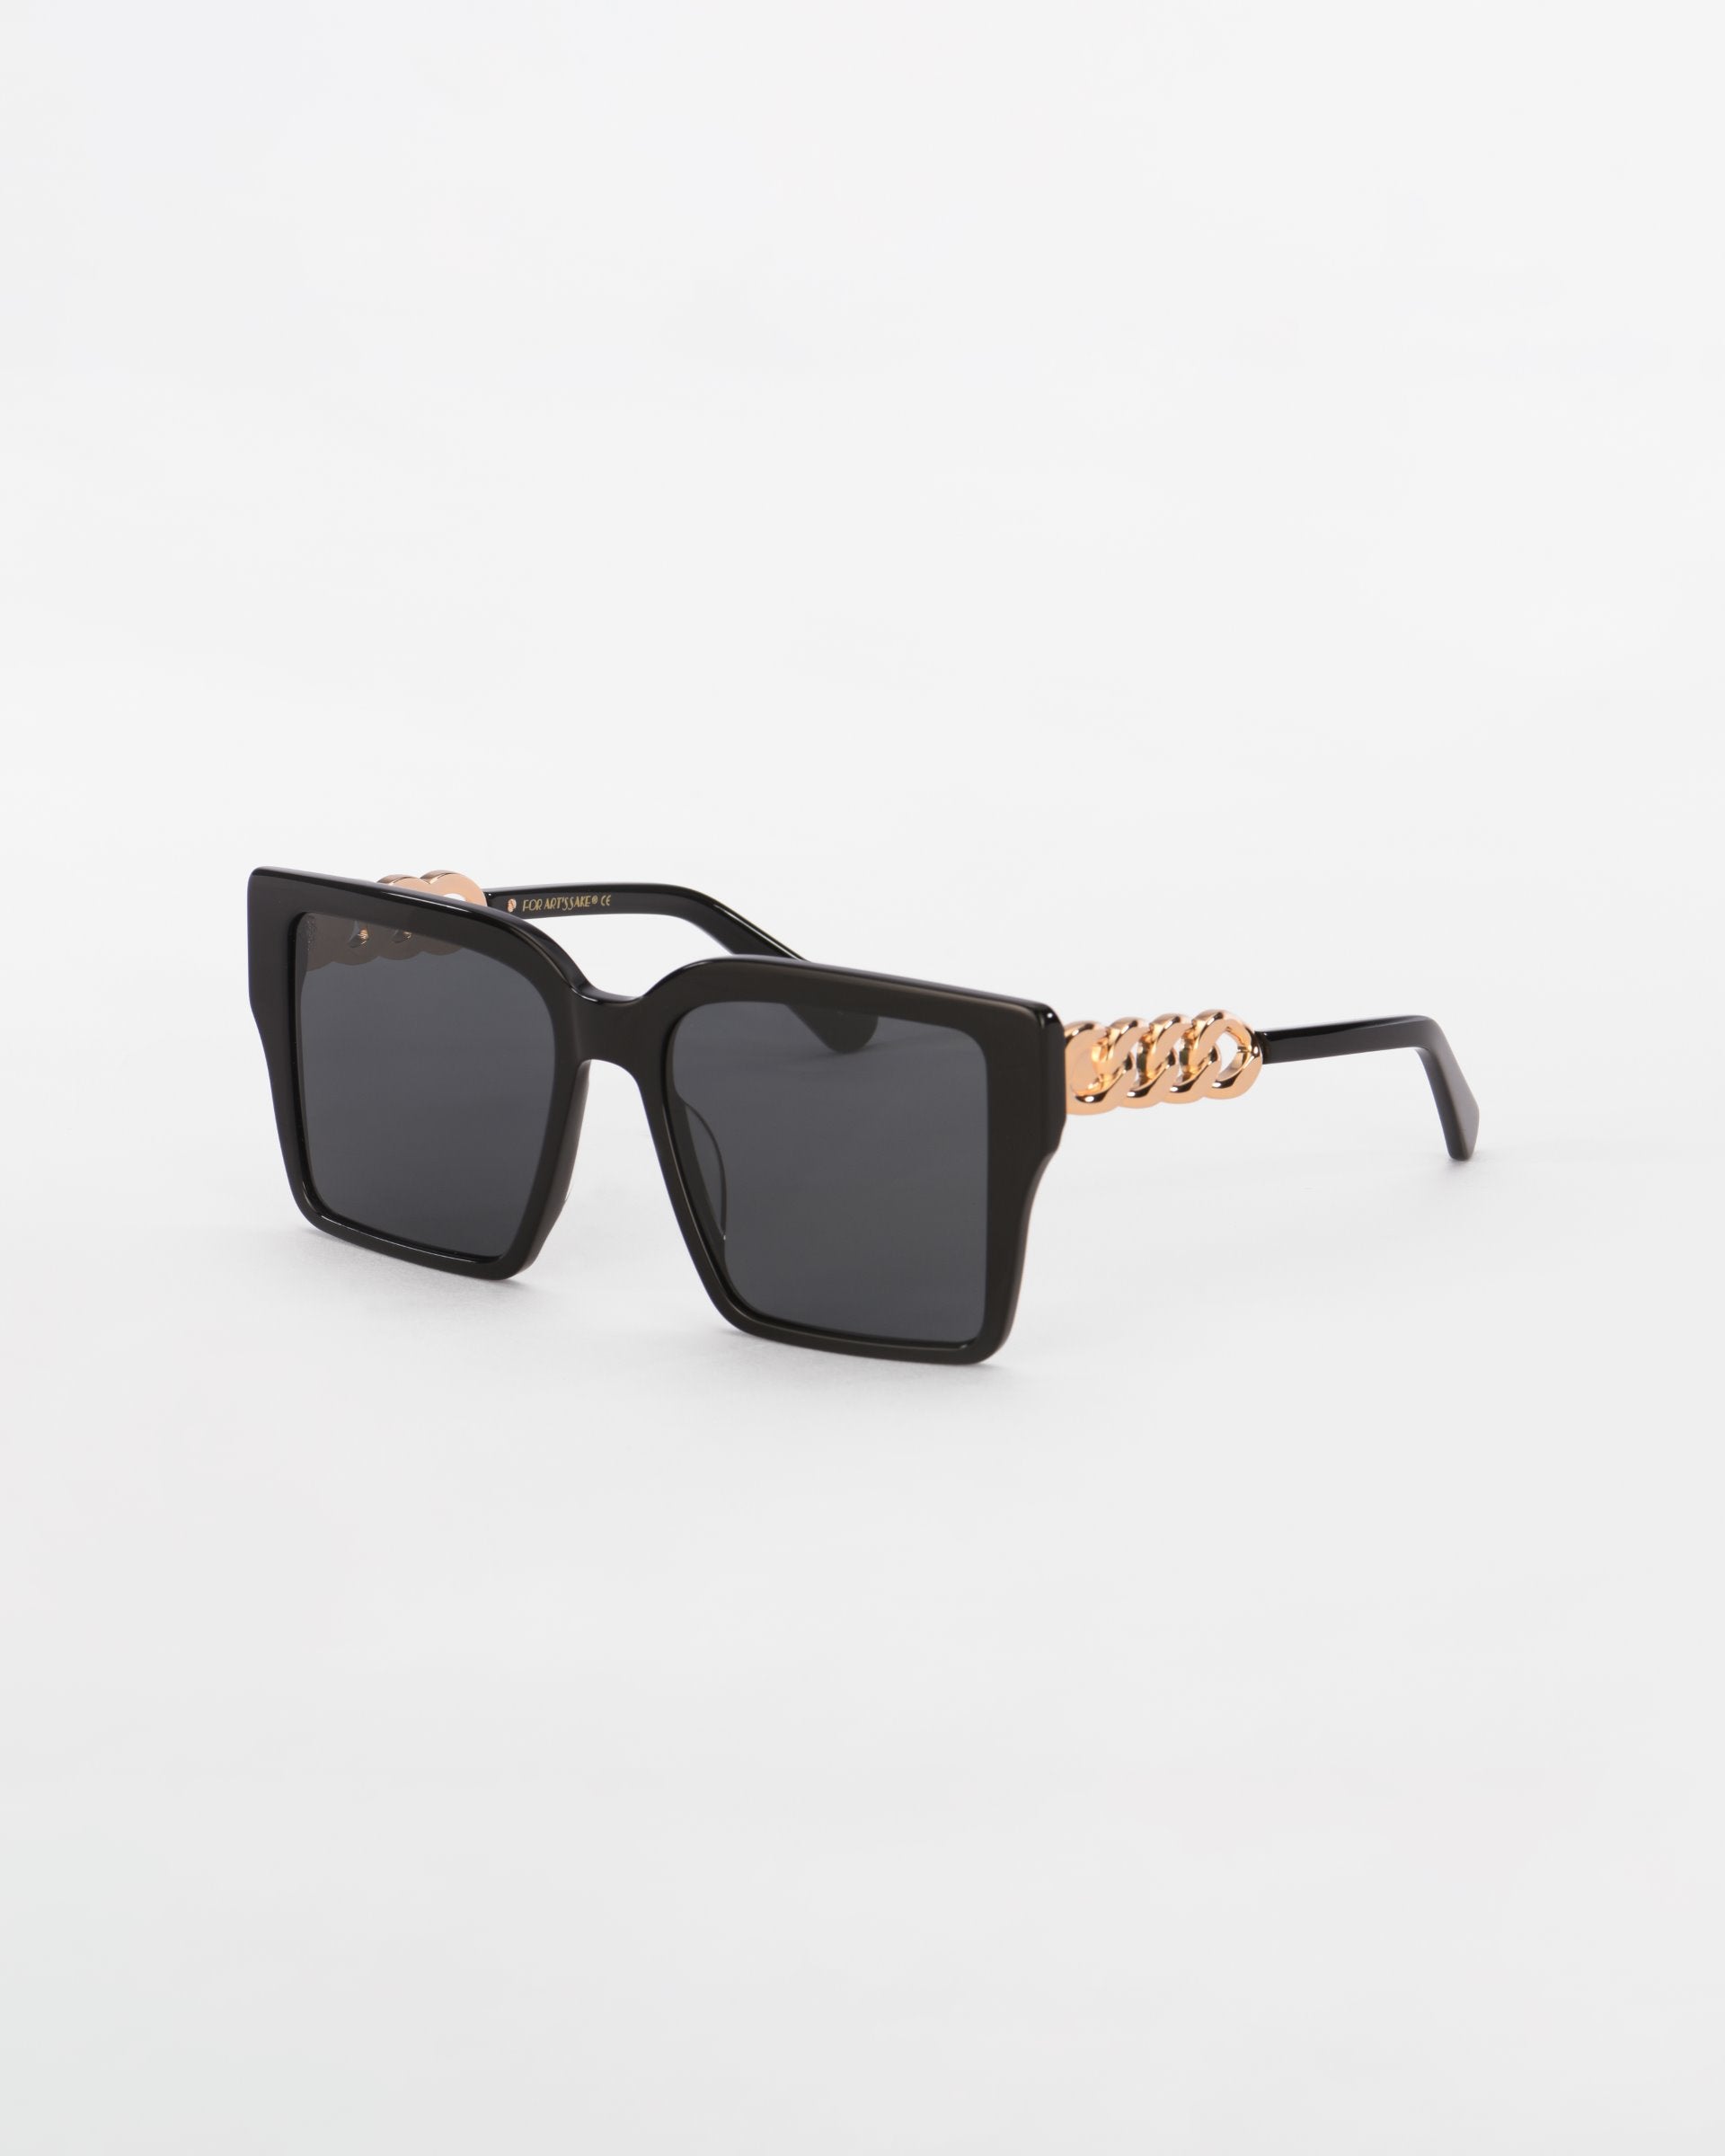 A pair of stylish black oversized square sunglasses named Castle from For Art's Sake® with ultra-lightweight dark lenses against a white background. The temples are adorned with an 18-karat gold plated chain detail, adding a touch of elegance to the modern design.